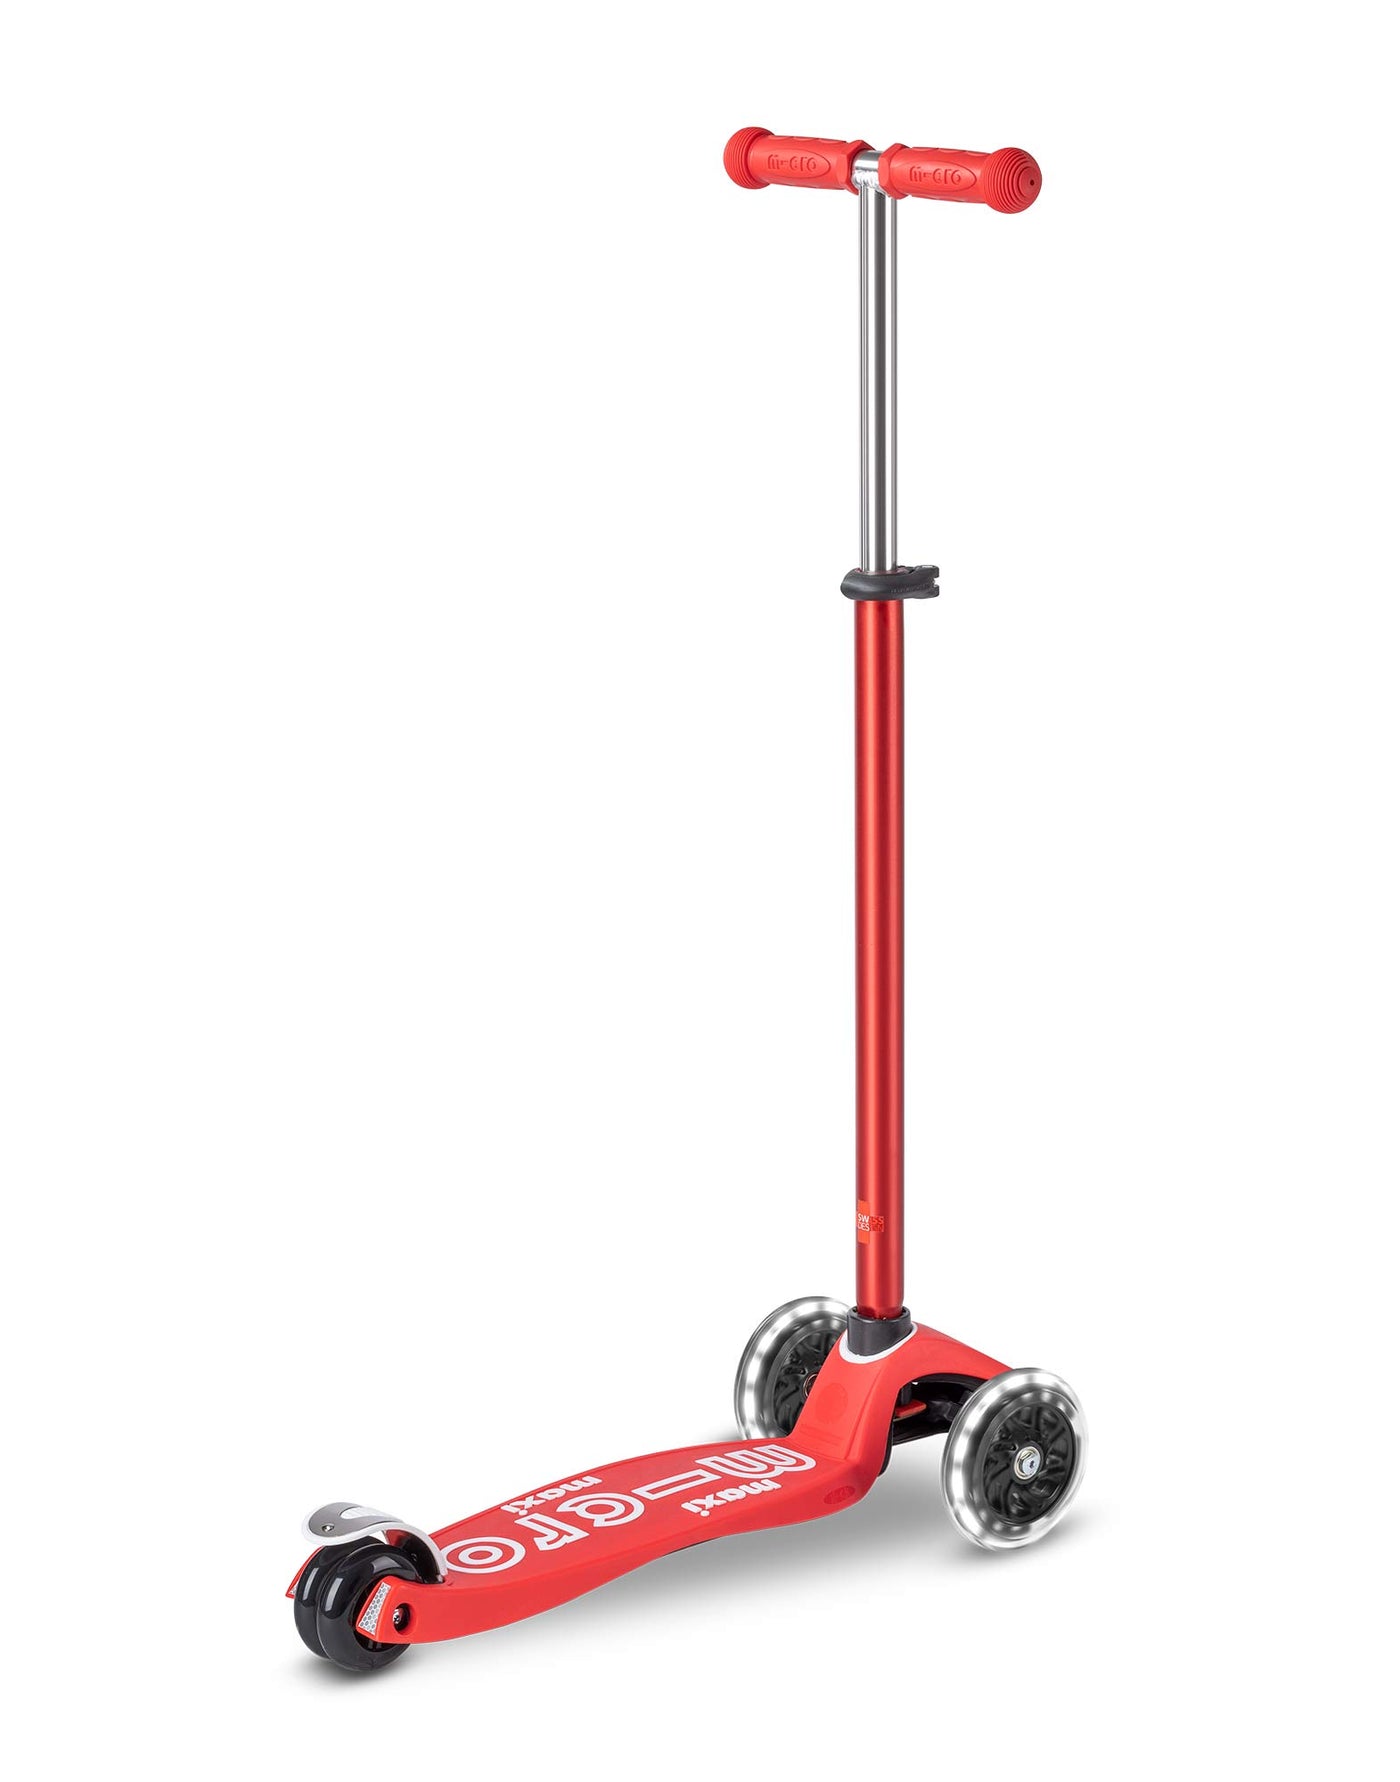 red maxi deluxe 3 wheel led kids scooter rear